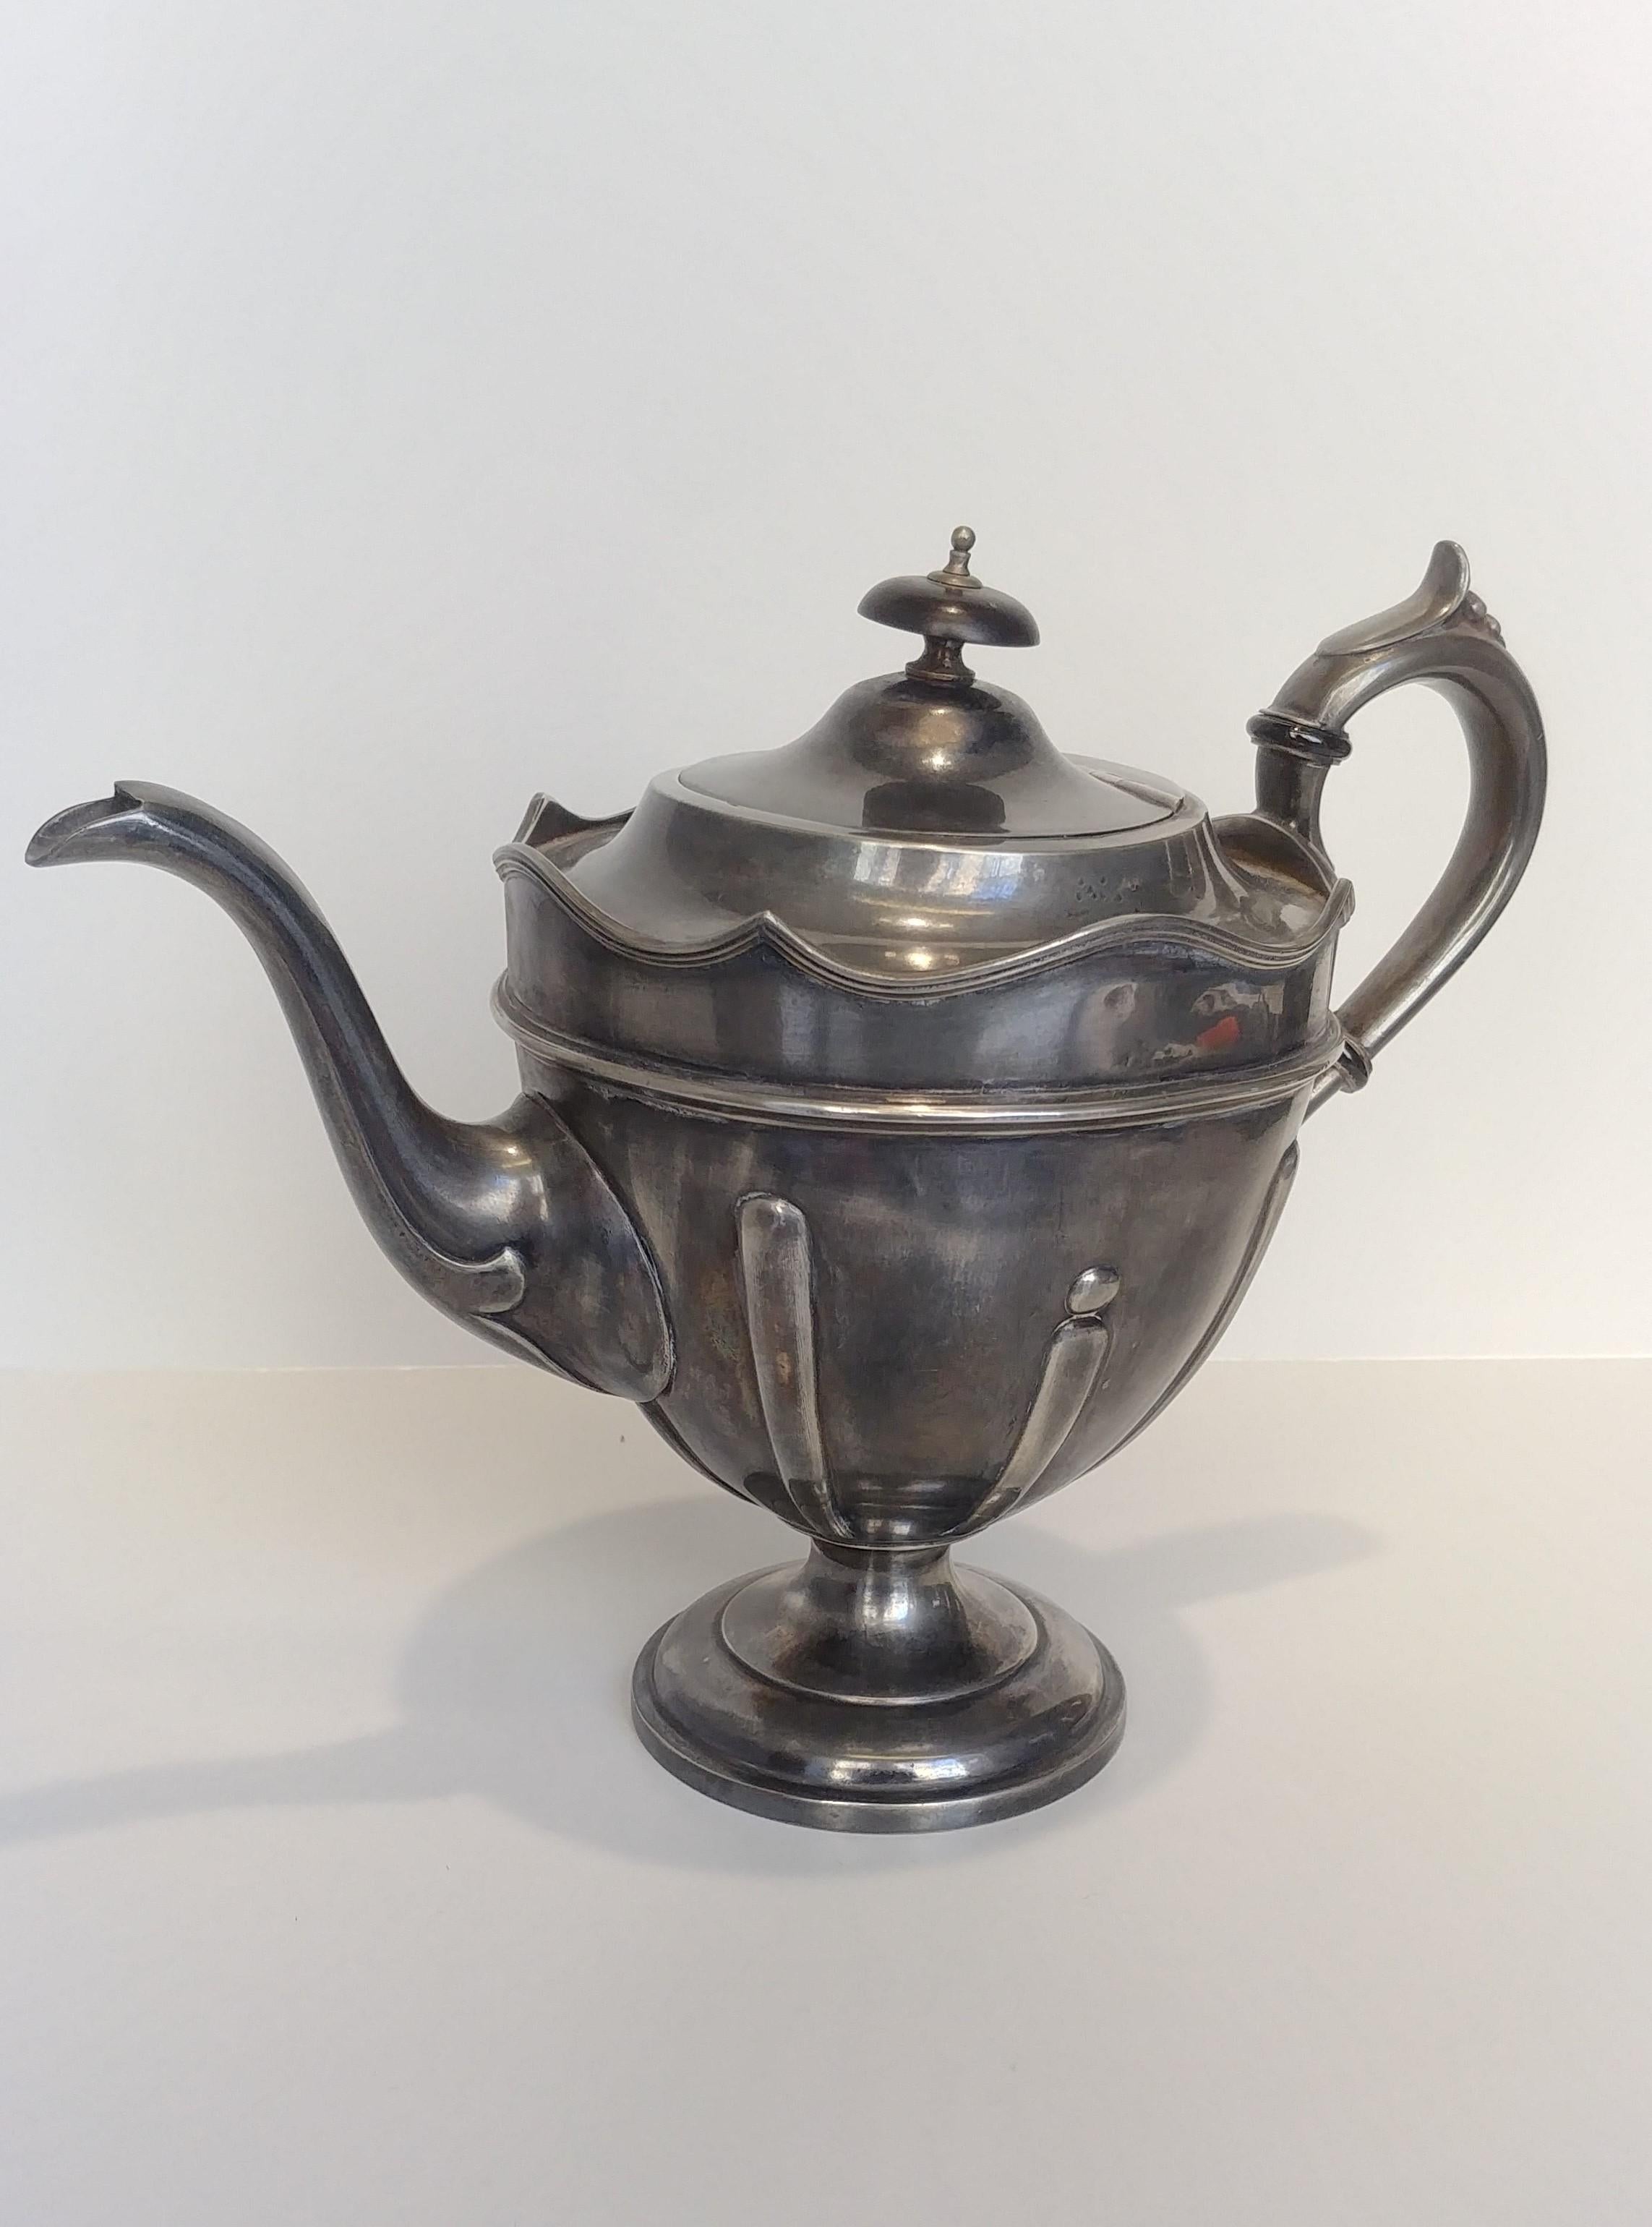 Harrison Fisher & Company pewter teapot made in 1915.
English pewter teapot in Art Nouveau style made in the famous Harrison Fisher & Company factory in 1915.
Originally the teapot was covered in silver, this attests to its antiquity and the